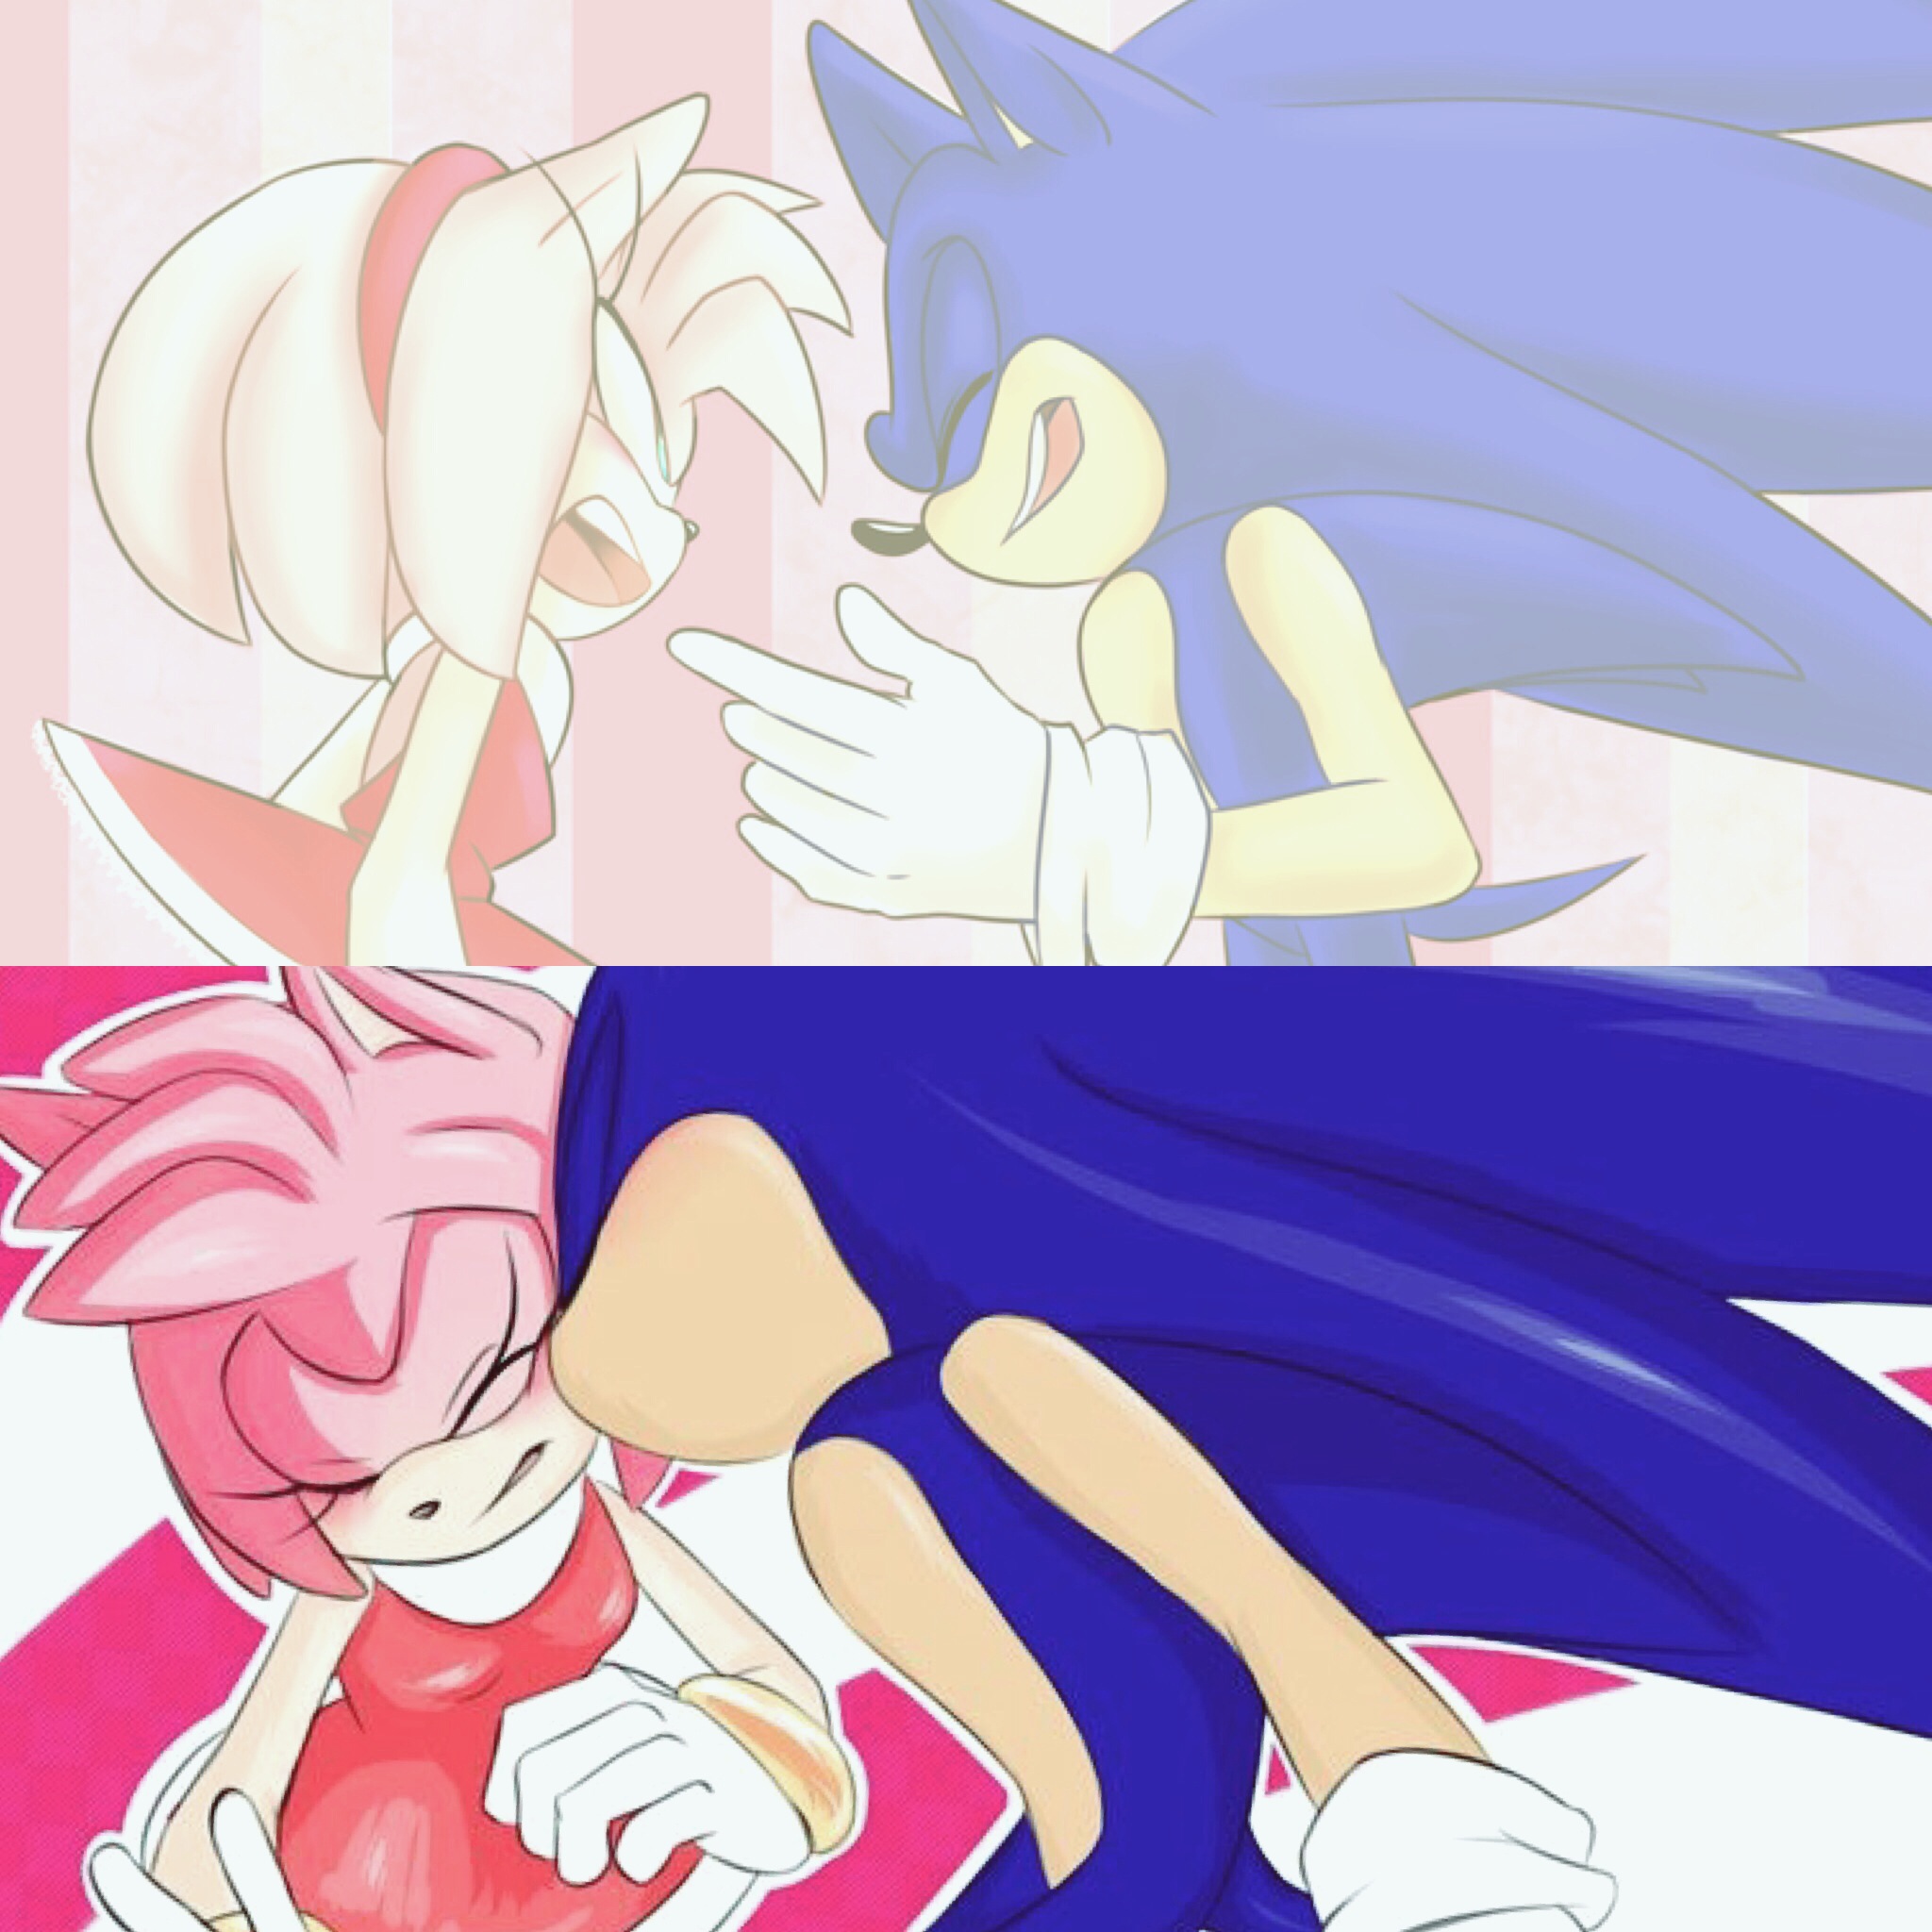 This visual is about sonamy I find this really cute. 💕💗💕 #sonamy.